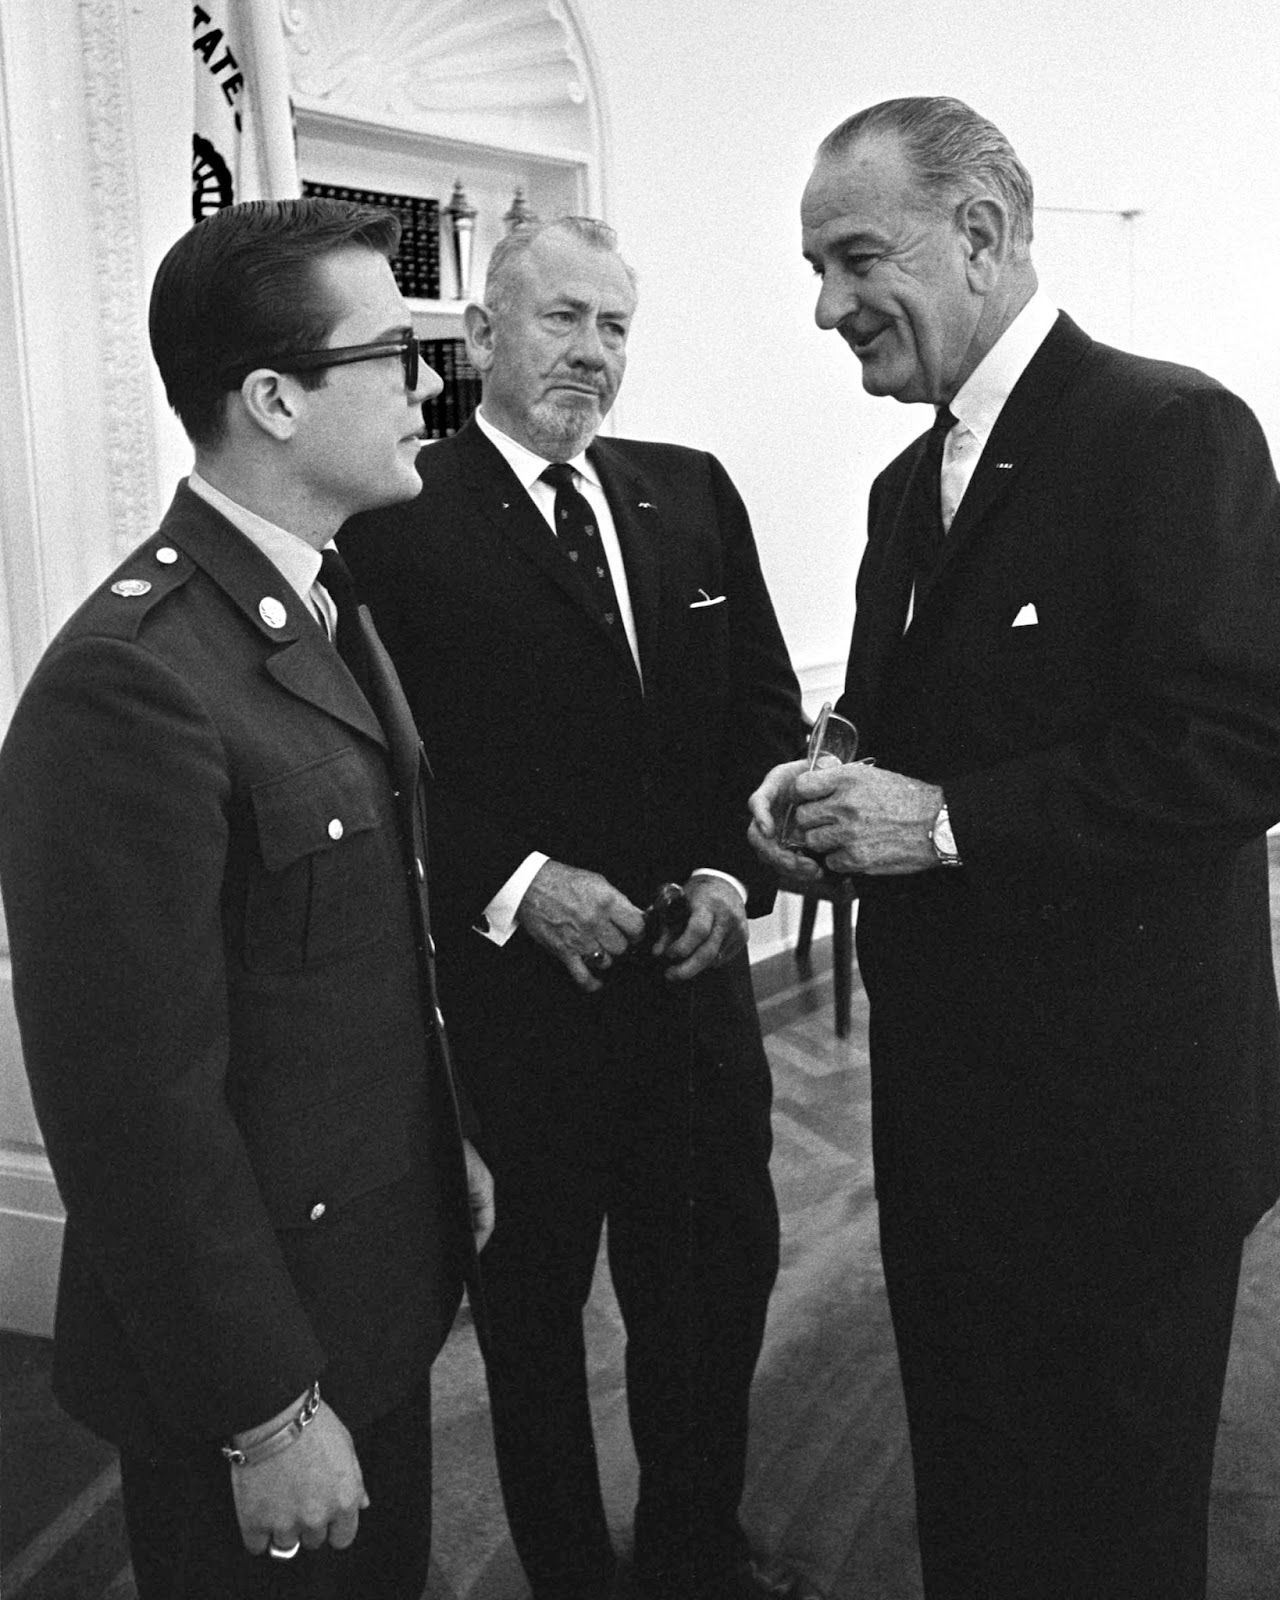 A photo of John Steinbeck and son John visit LBJ at the White House